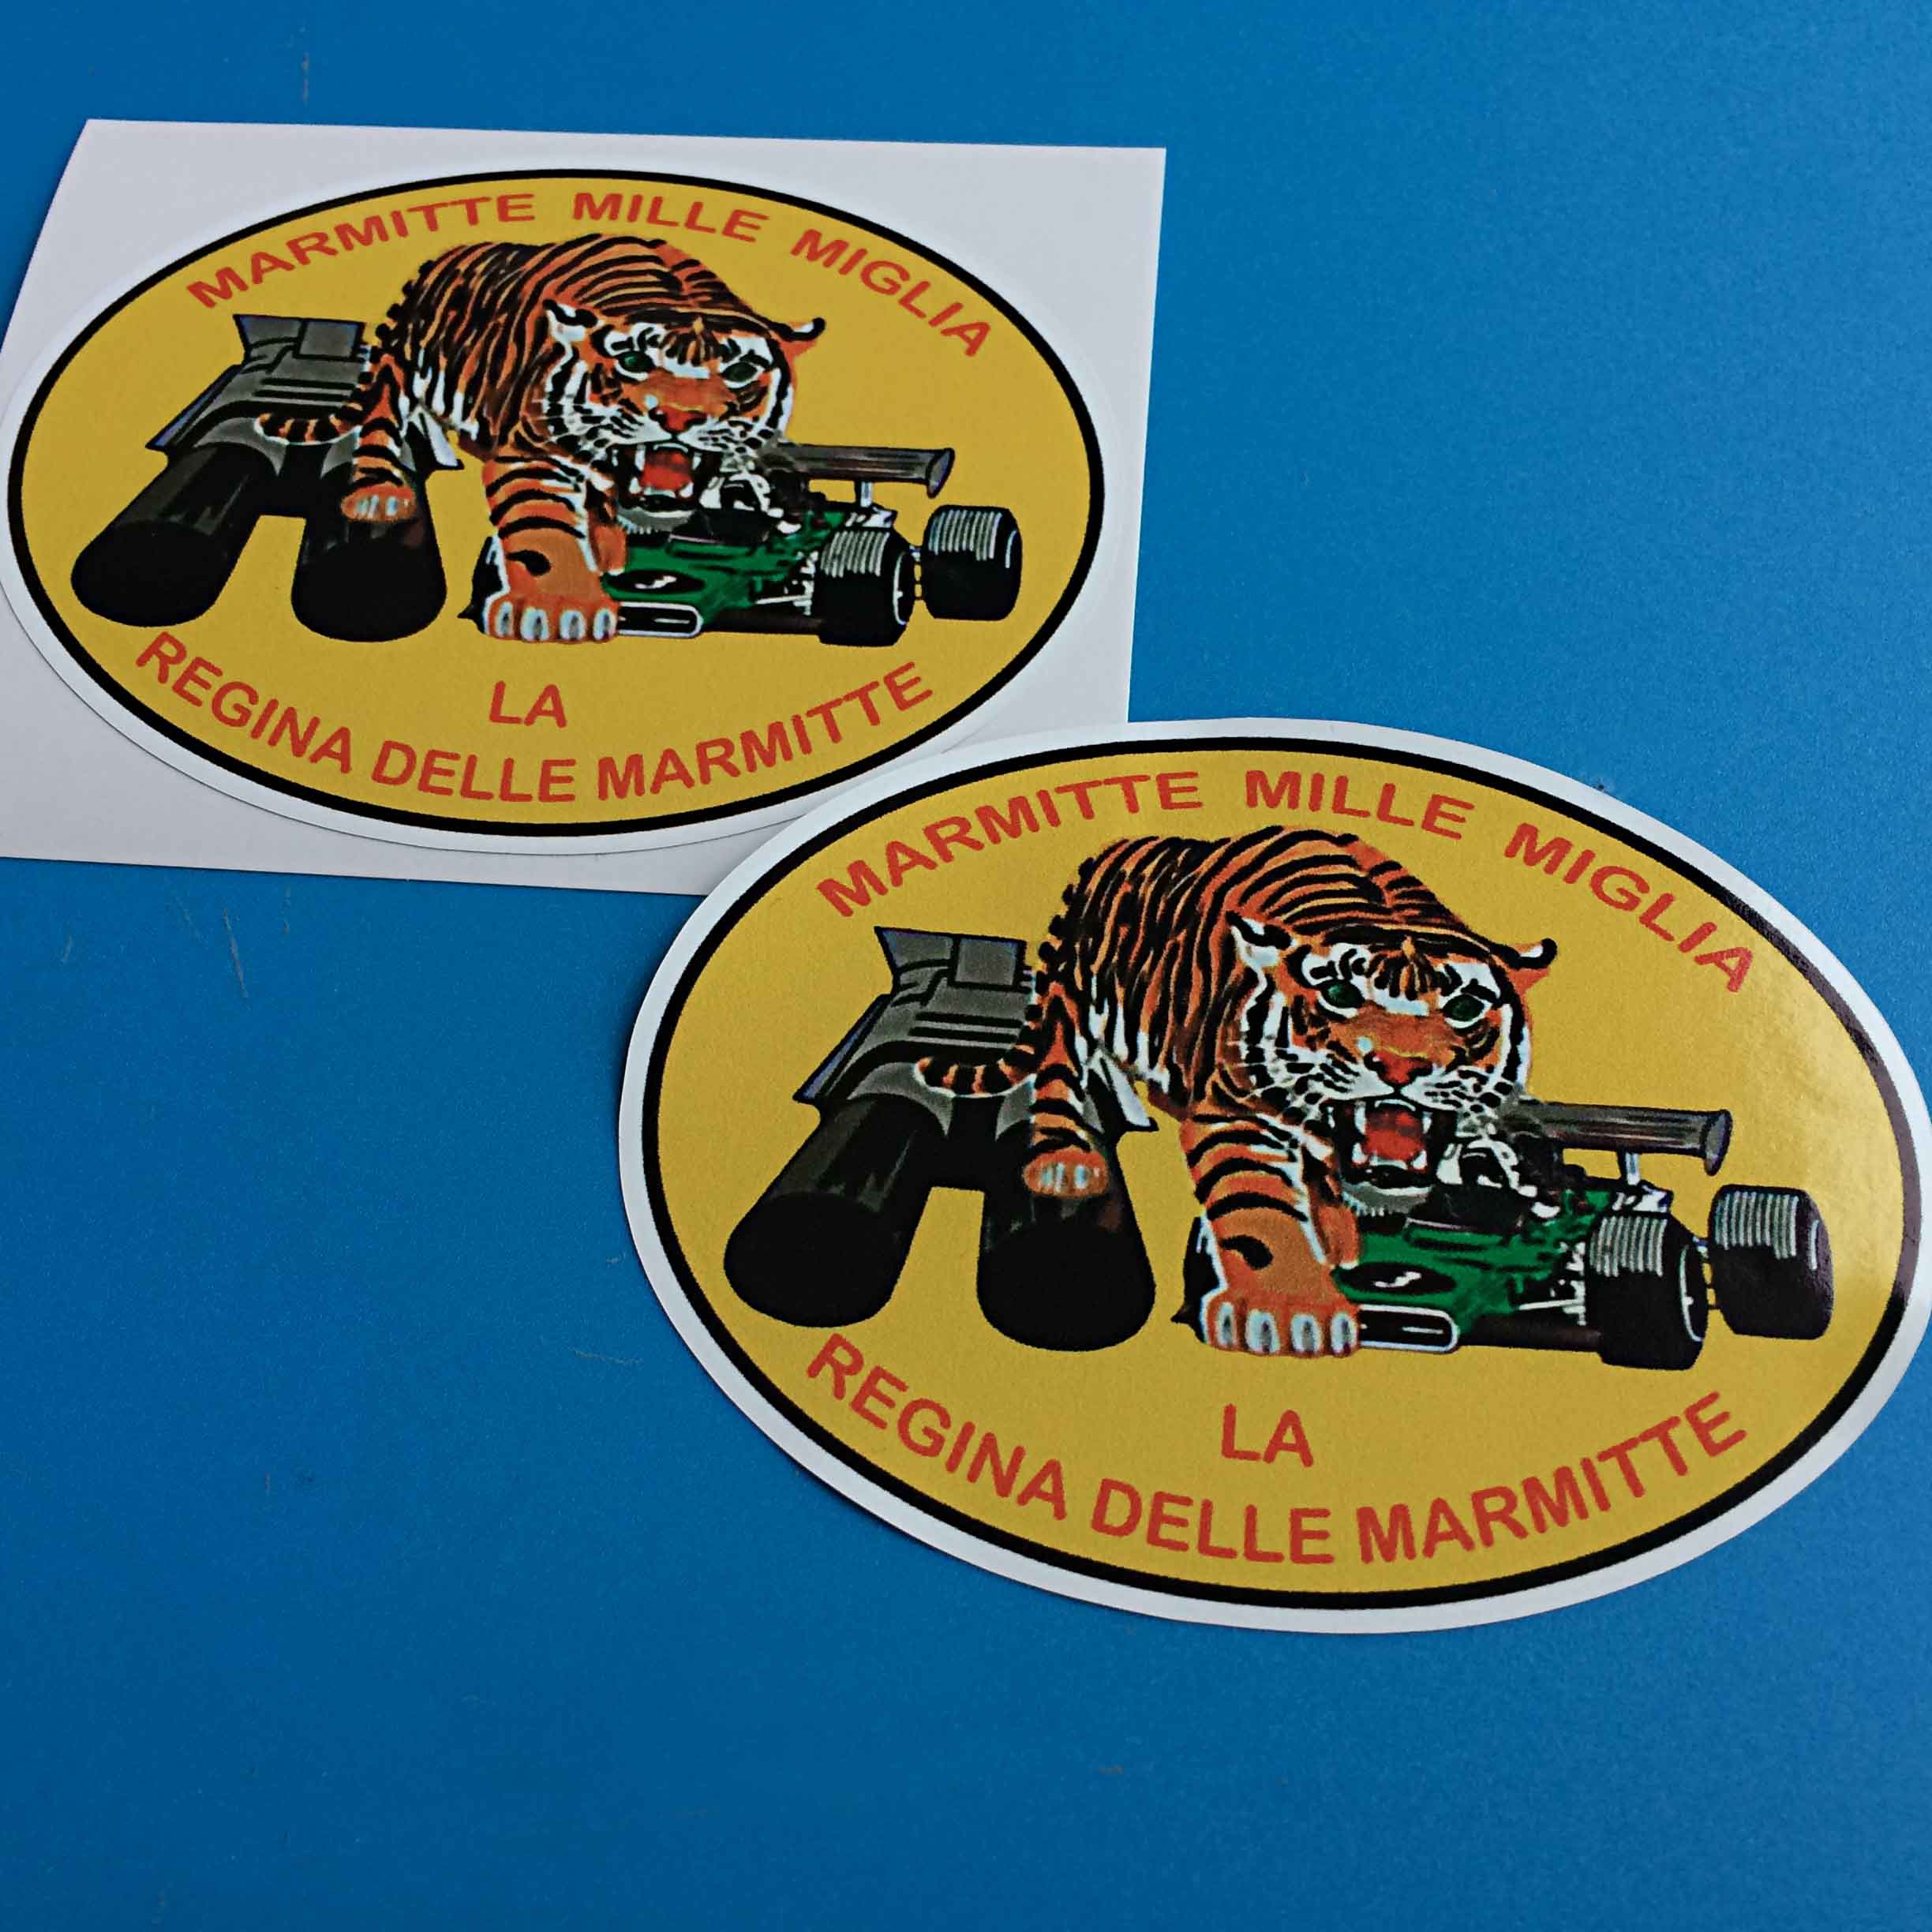 Marmitte Mille Miglia La Regina Delle Marmitte red lettering. A tiger, green racing car and exhaust pipes are in the centre of a yellow oval background.